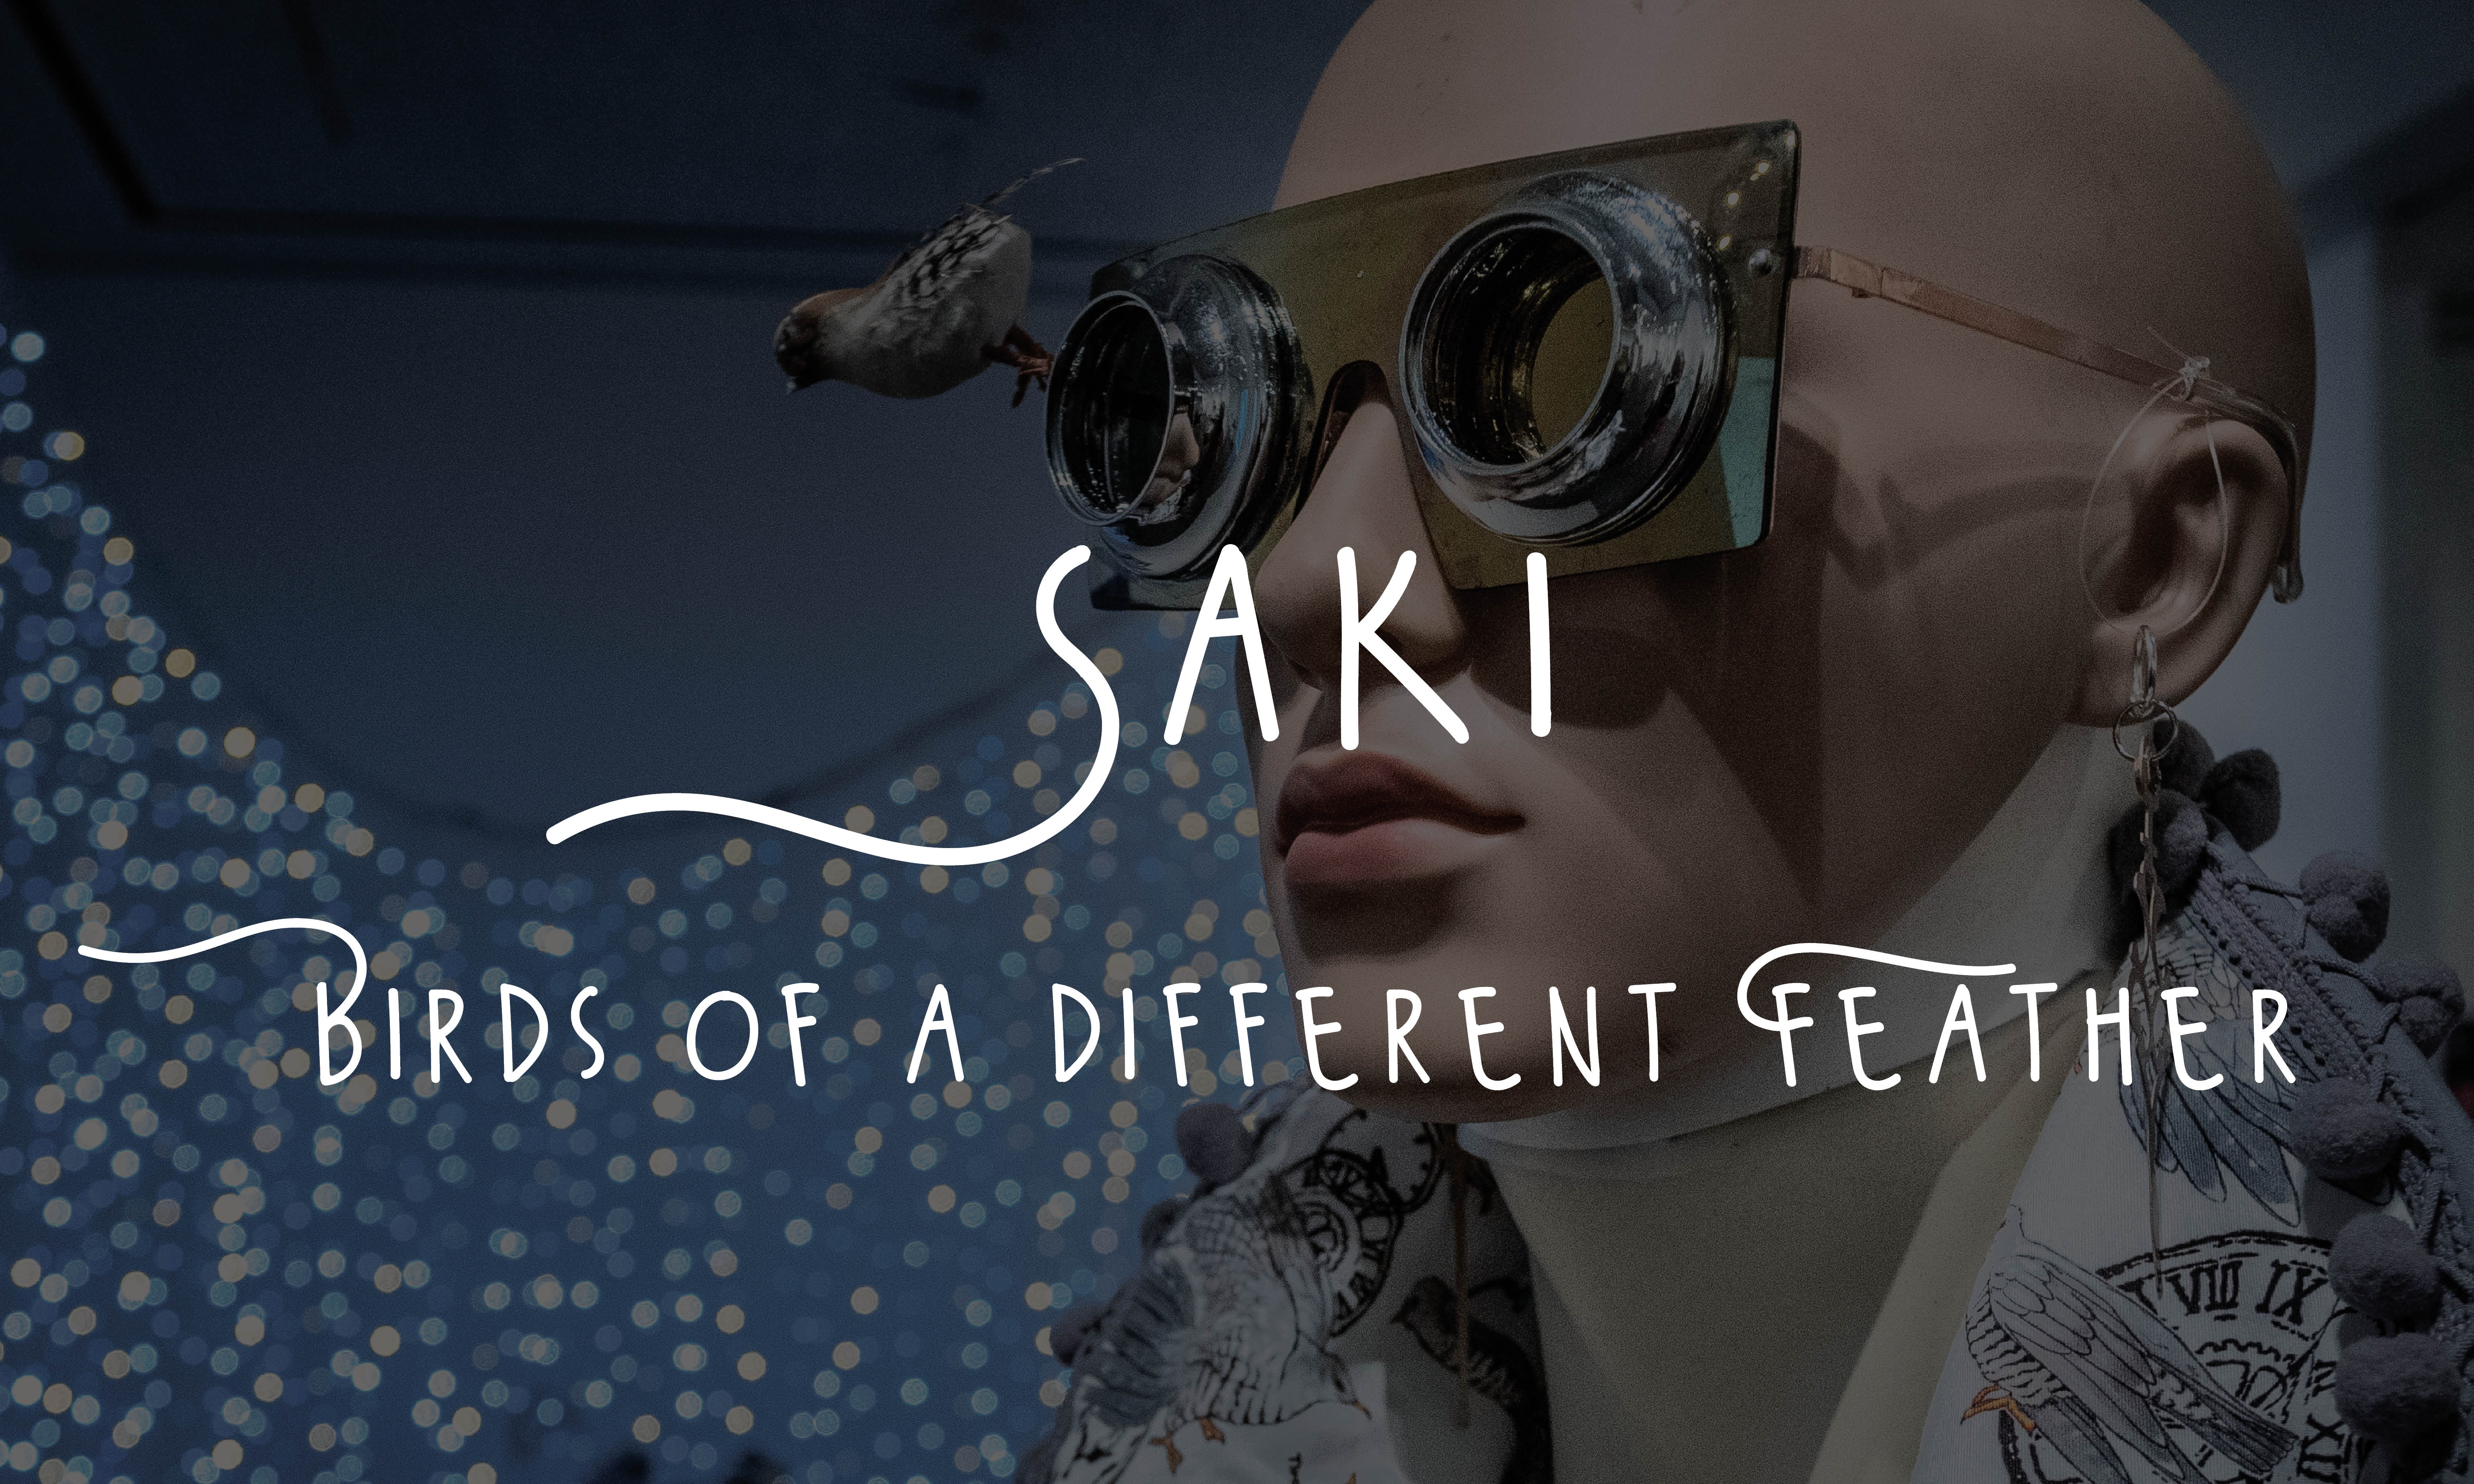 Saki: Birds of a Different Feather